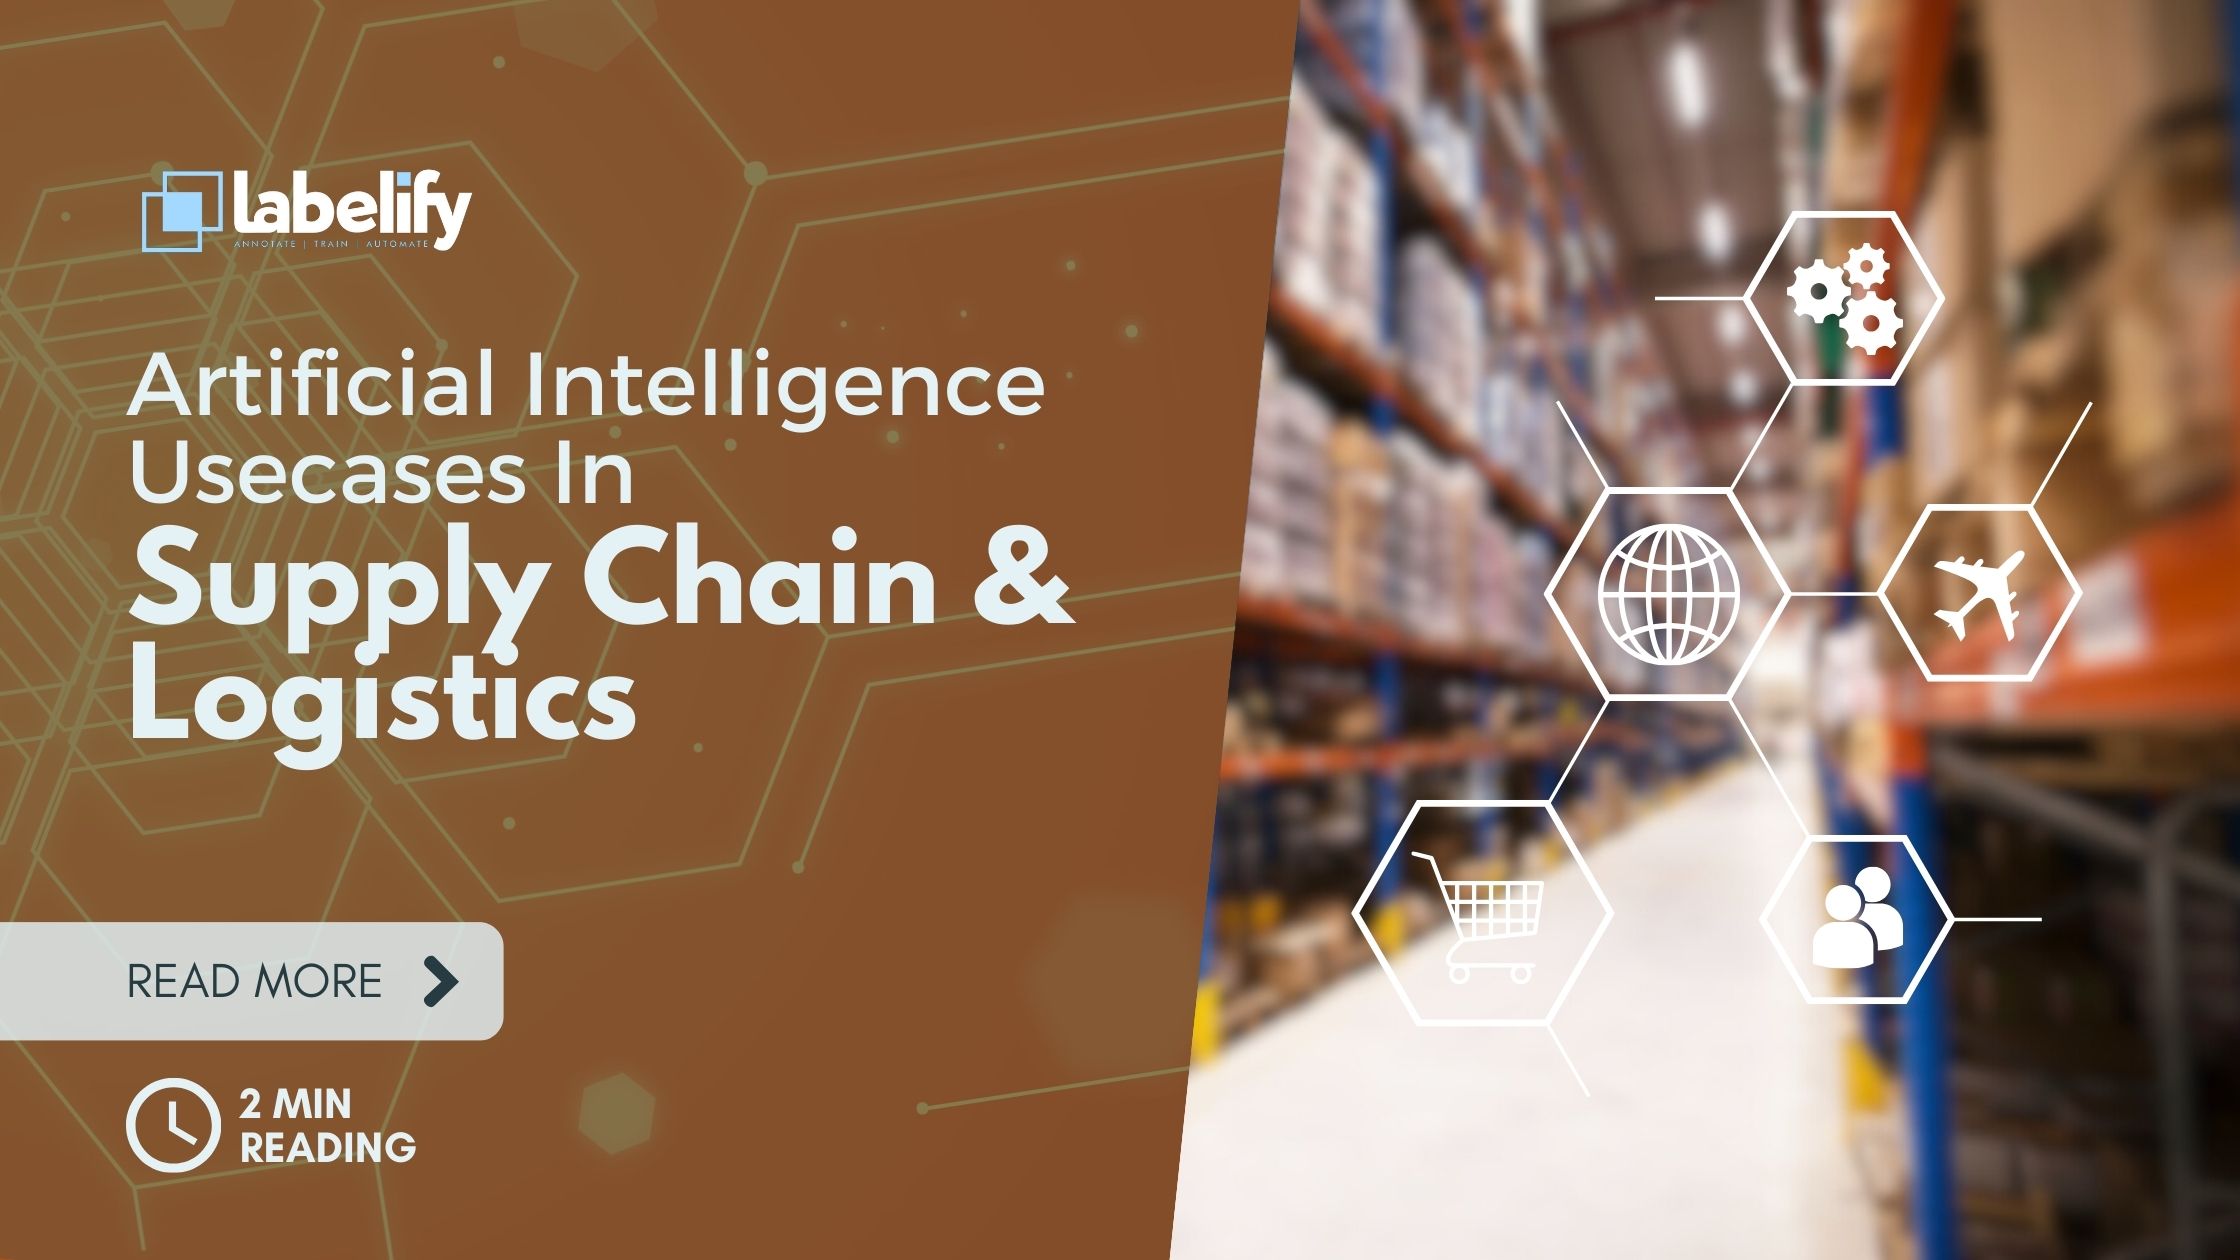 Artificial Intelligence Usecases in Supply Chain & Logistics